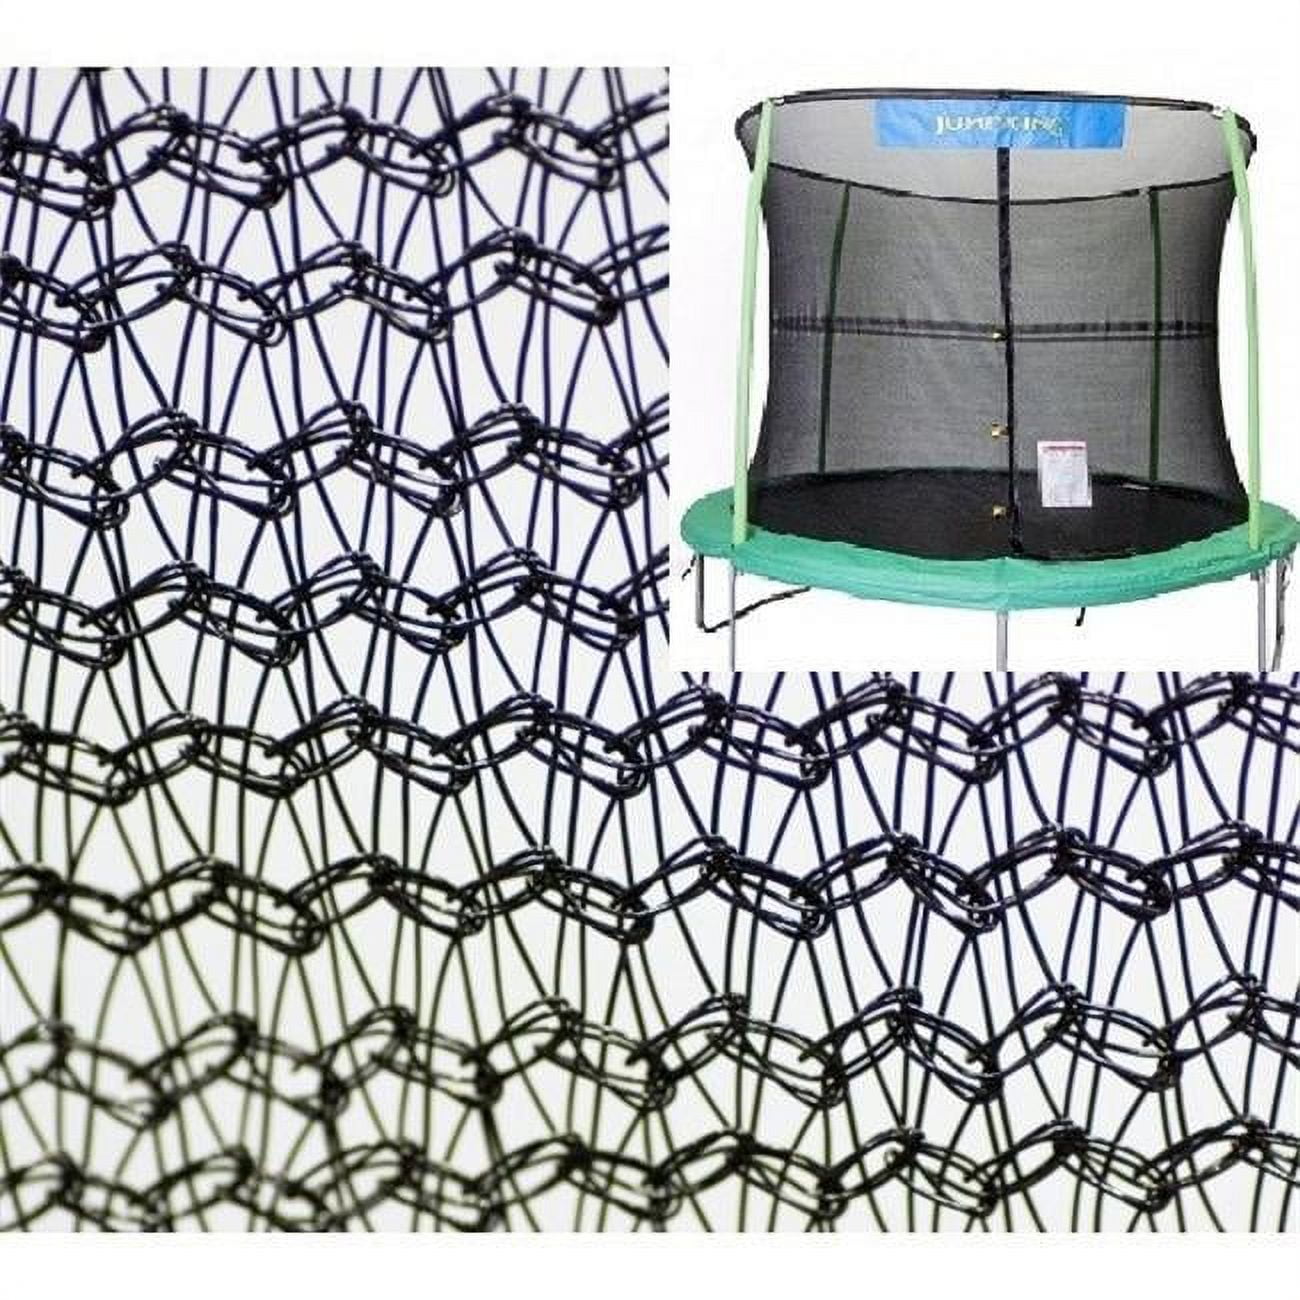 Picture of Jumpking NET15-JP4-7JK 15 ft. Enclosure Netting for 4 Poles - 7 in. Springs with JK Logo